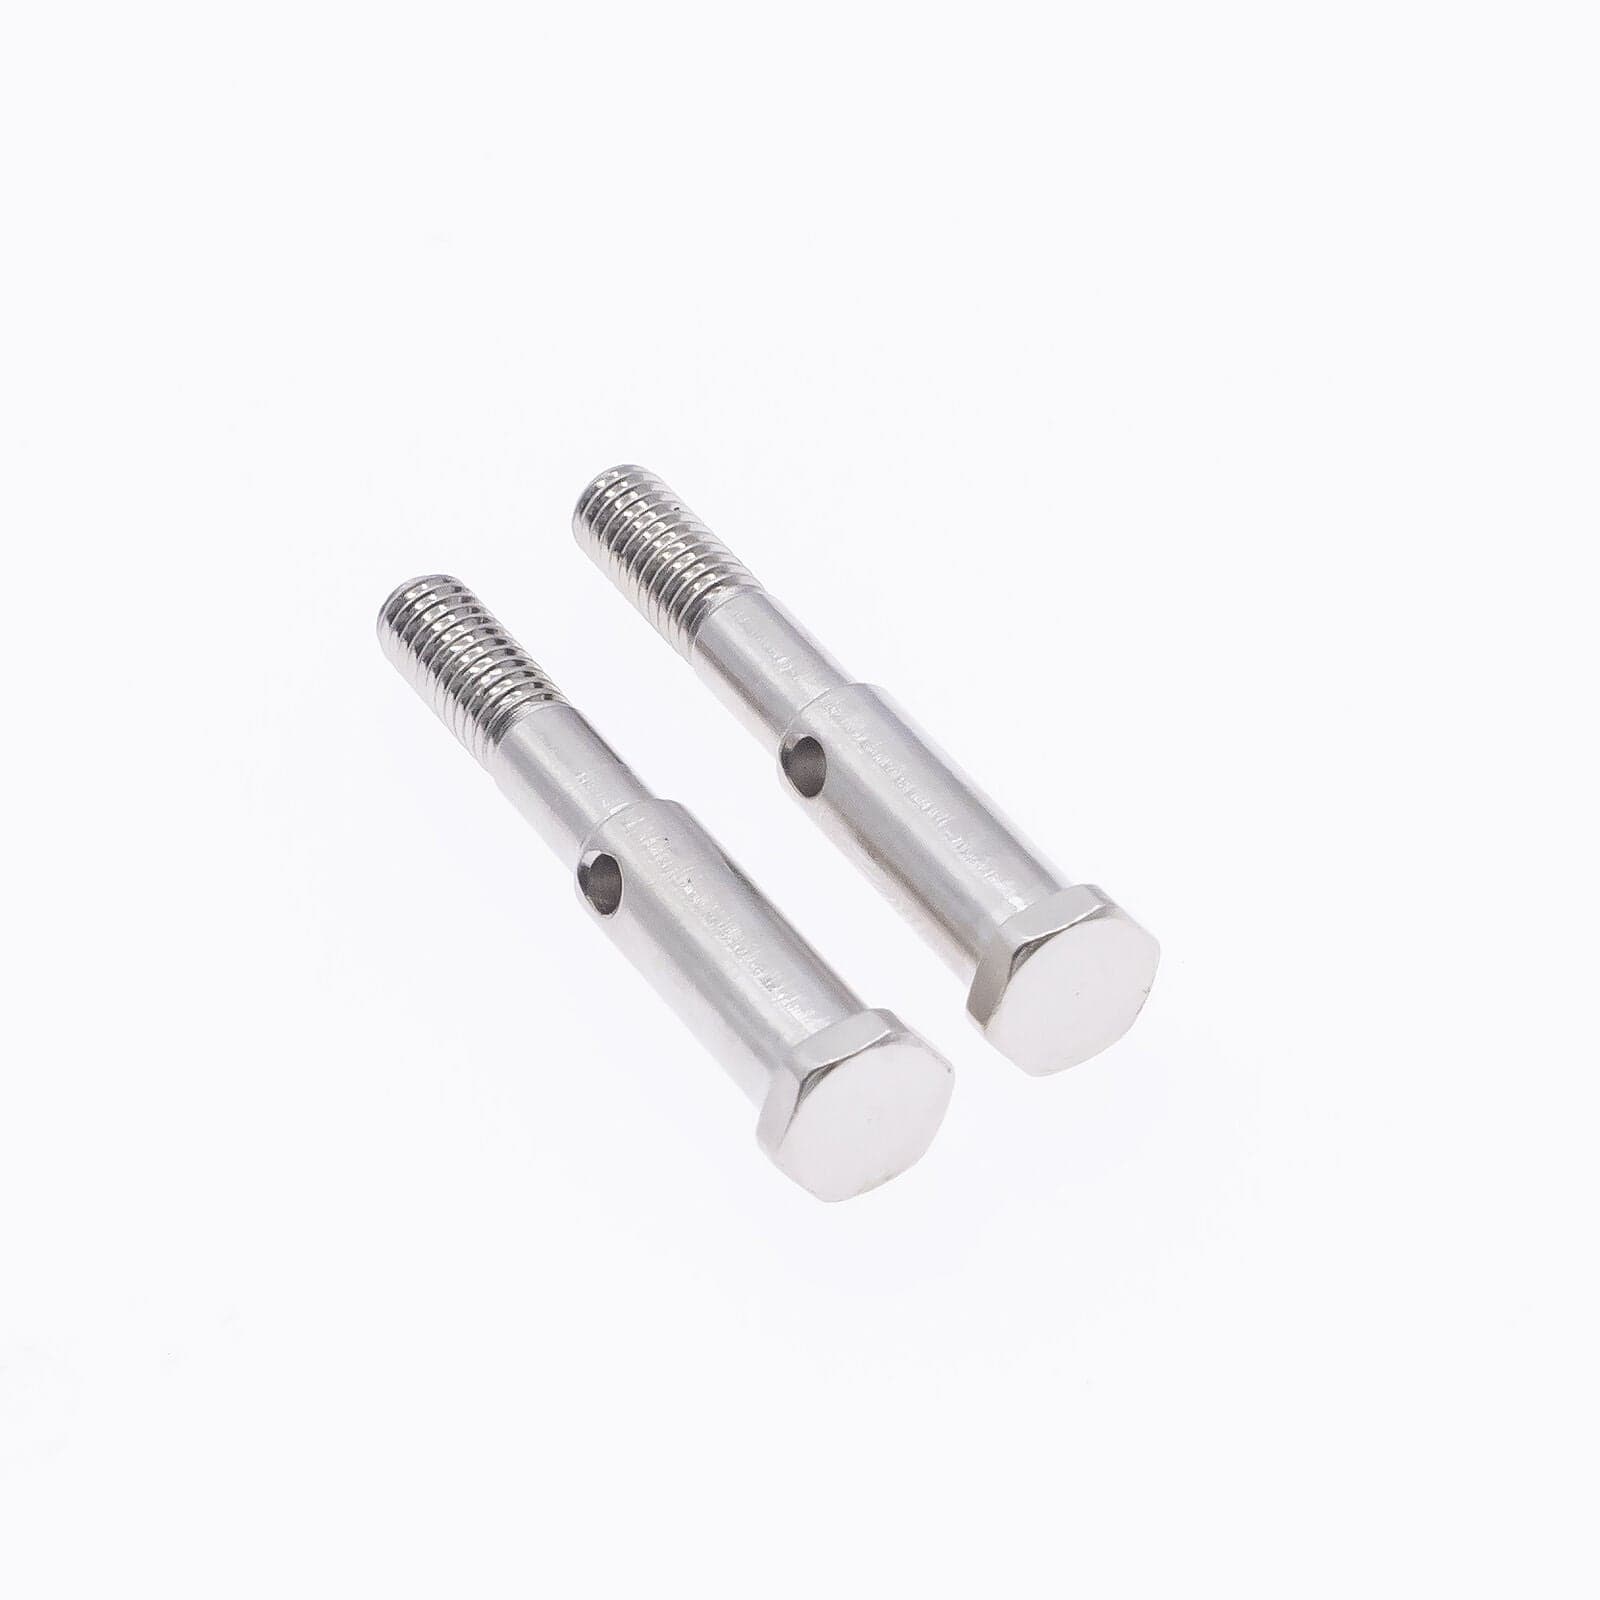 RCAWD ECX UPGRADE PARTS RCAWD Front Axle Shaft ECX1035 For RC Hobby Car 1-10 ECX 2WD Series Hop-ups 2pcs